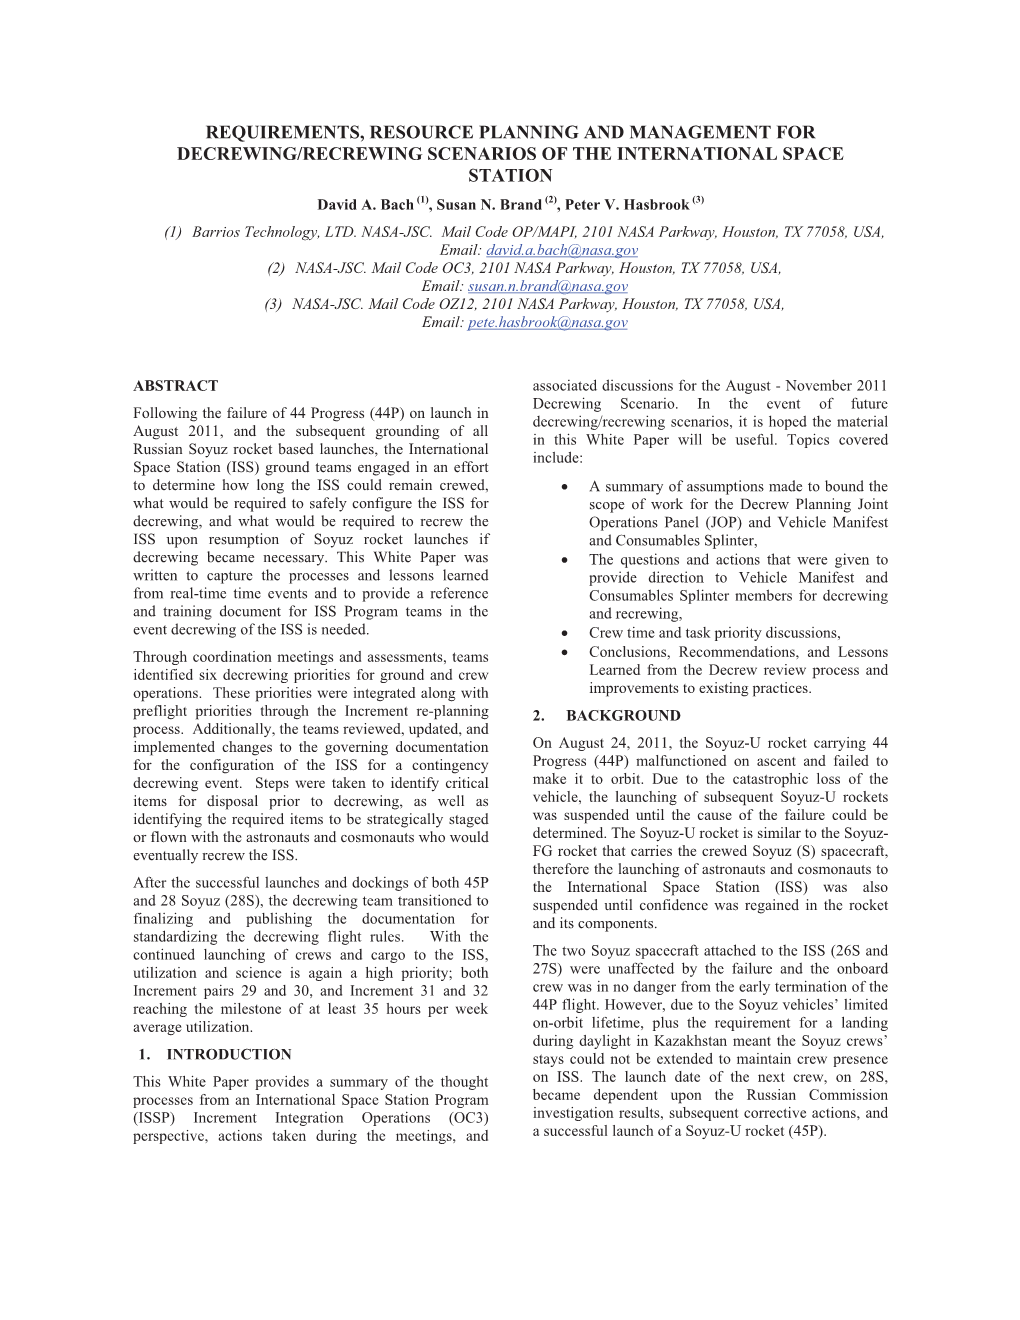 REQUIREMENTS, RESOURCE PLANNING and MANAGEMENT for DECREWING/RECREWING SCENARIOS of the INTERNATIONAL SPACE STATION David A